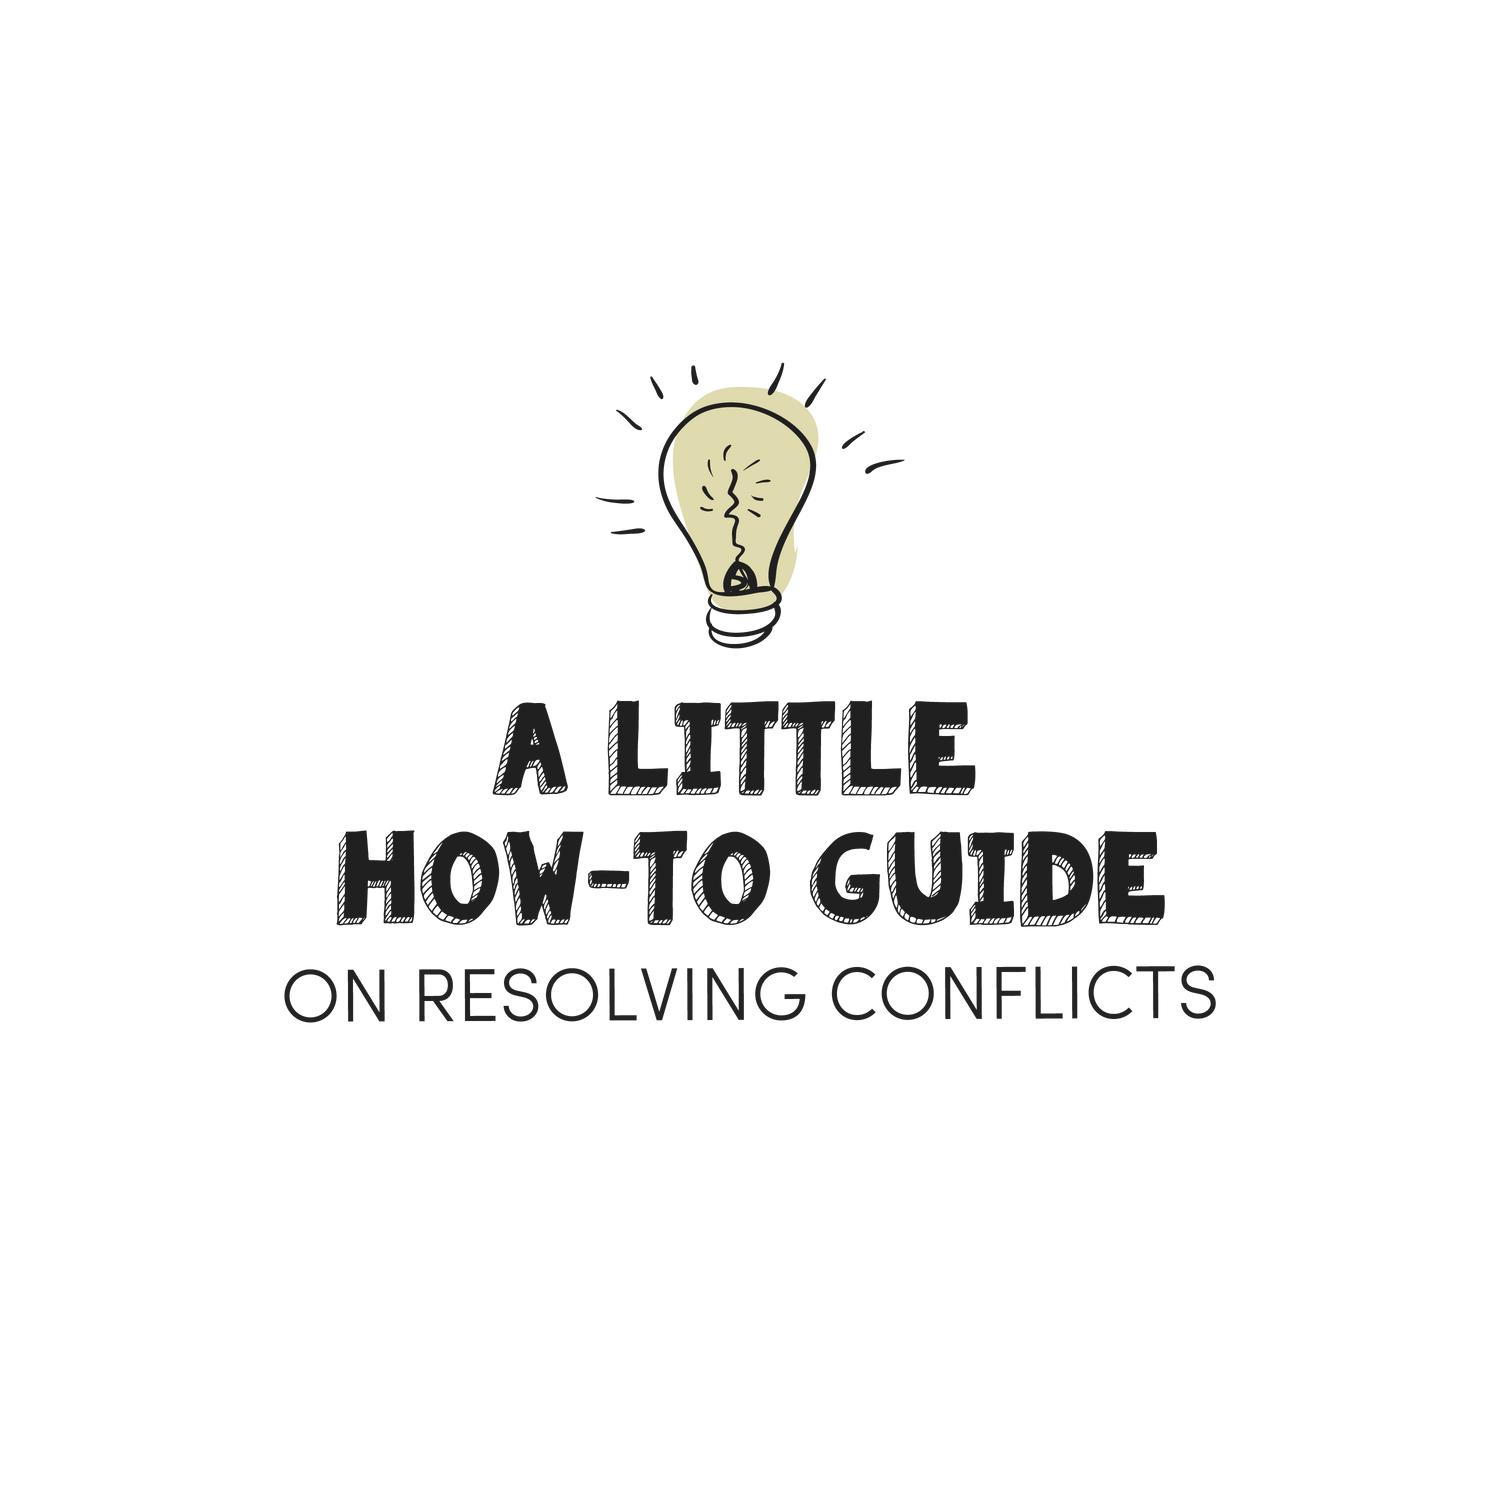 English version of the logo of the document to print A little how-to guide on resolving conflicts made by Les Belles Combines